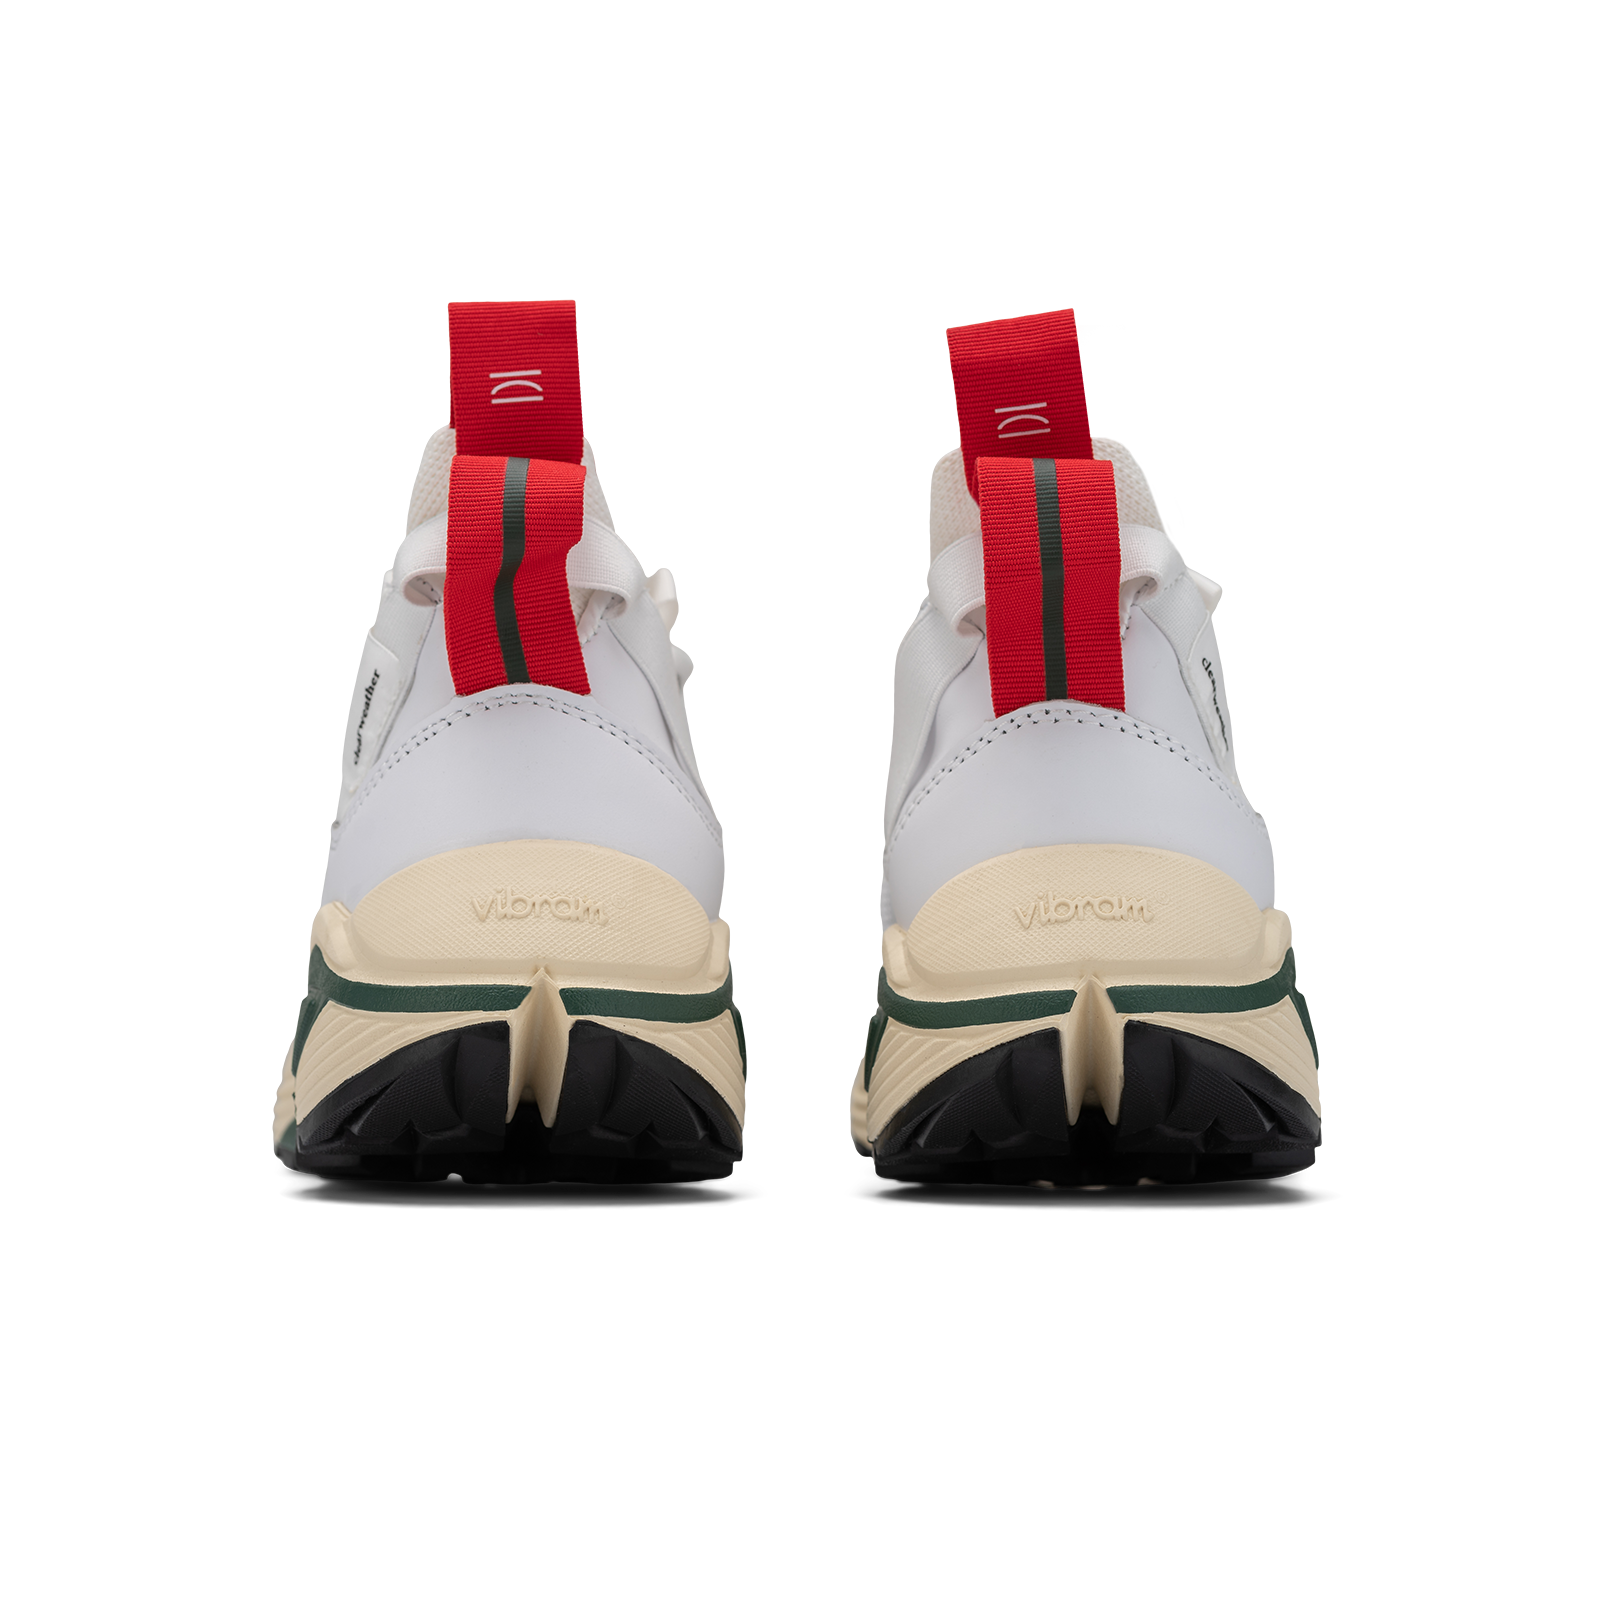 Back view, Contera Cloud Forest is a runner with White fullgrain and Nubuck leather overlays White stretch mesh underlays, Red webbing heel and tongue pull, webbing lace system gream and green Virbam midsole and black vibram rubber outsole.